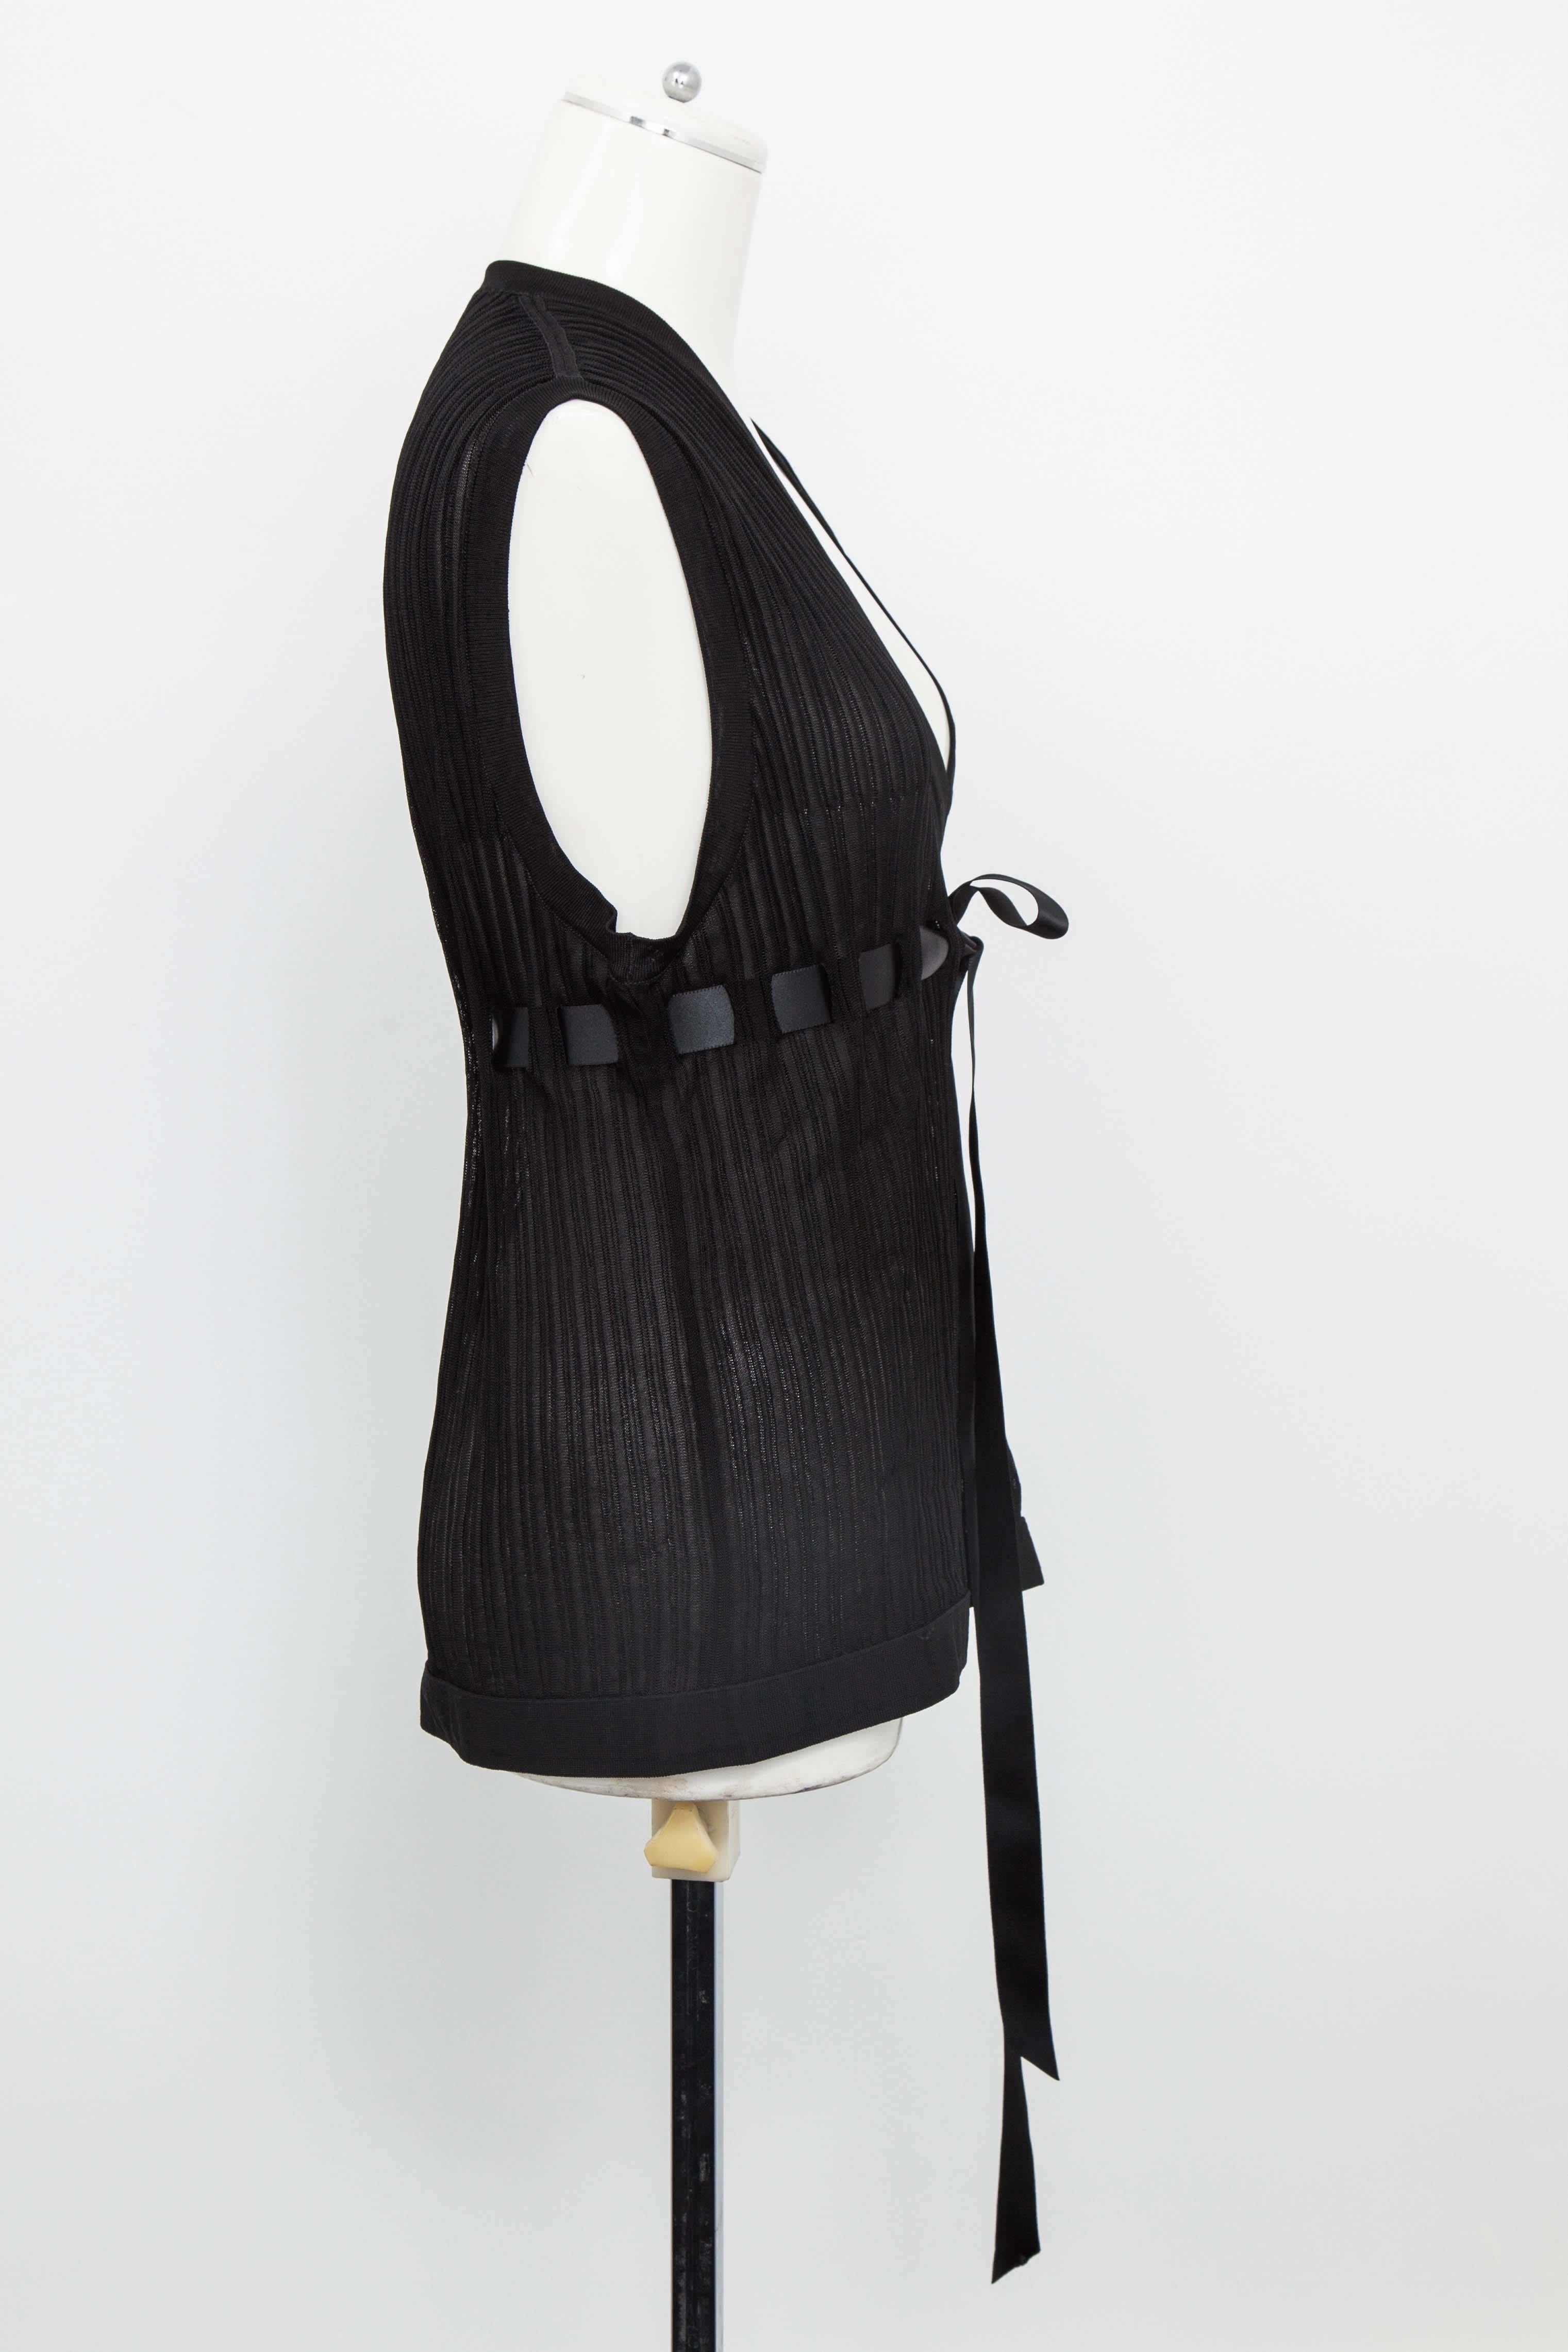 Chanel Black Sleeveless Knit Top with Bow 2